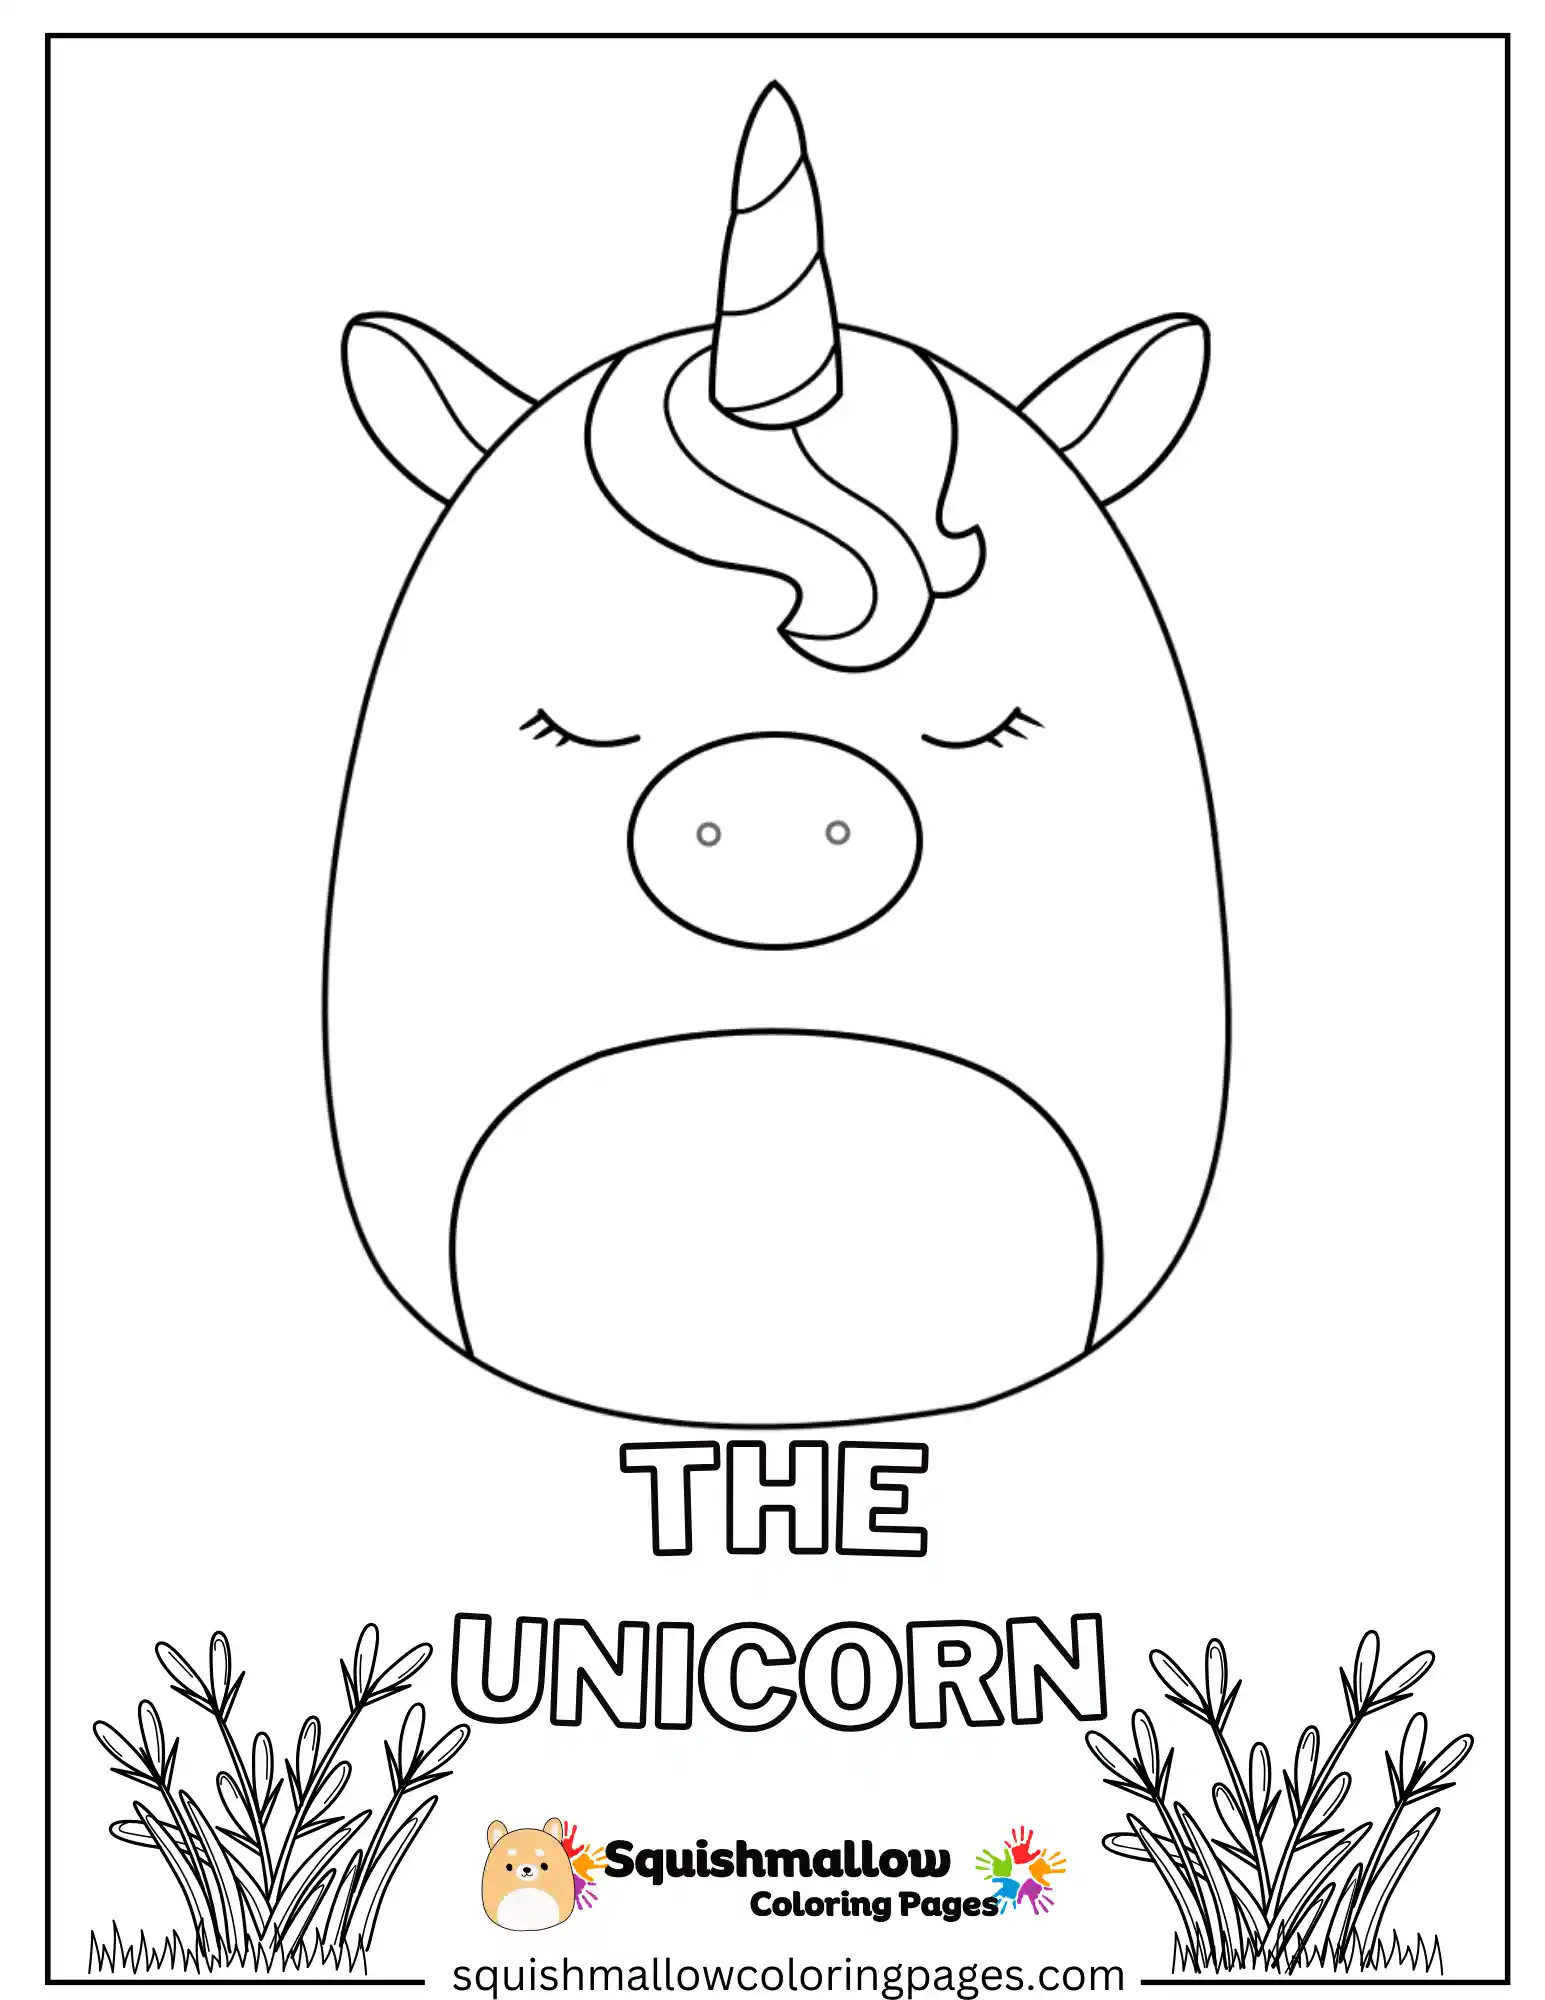 The Unicorn Squishmallow Coloring Pages